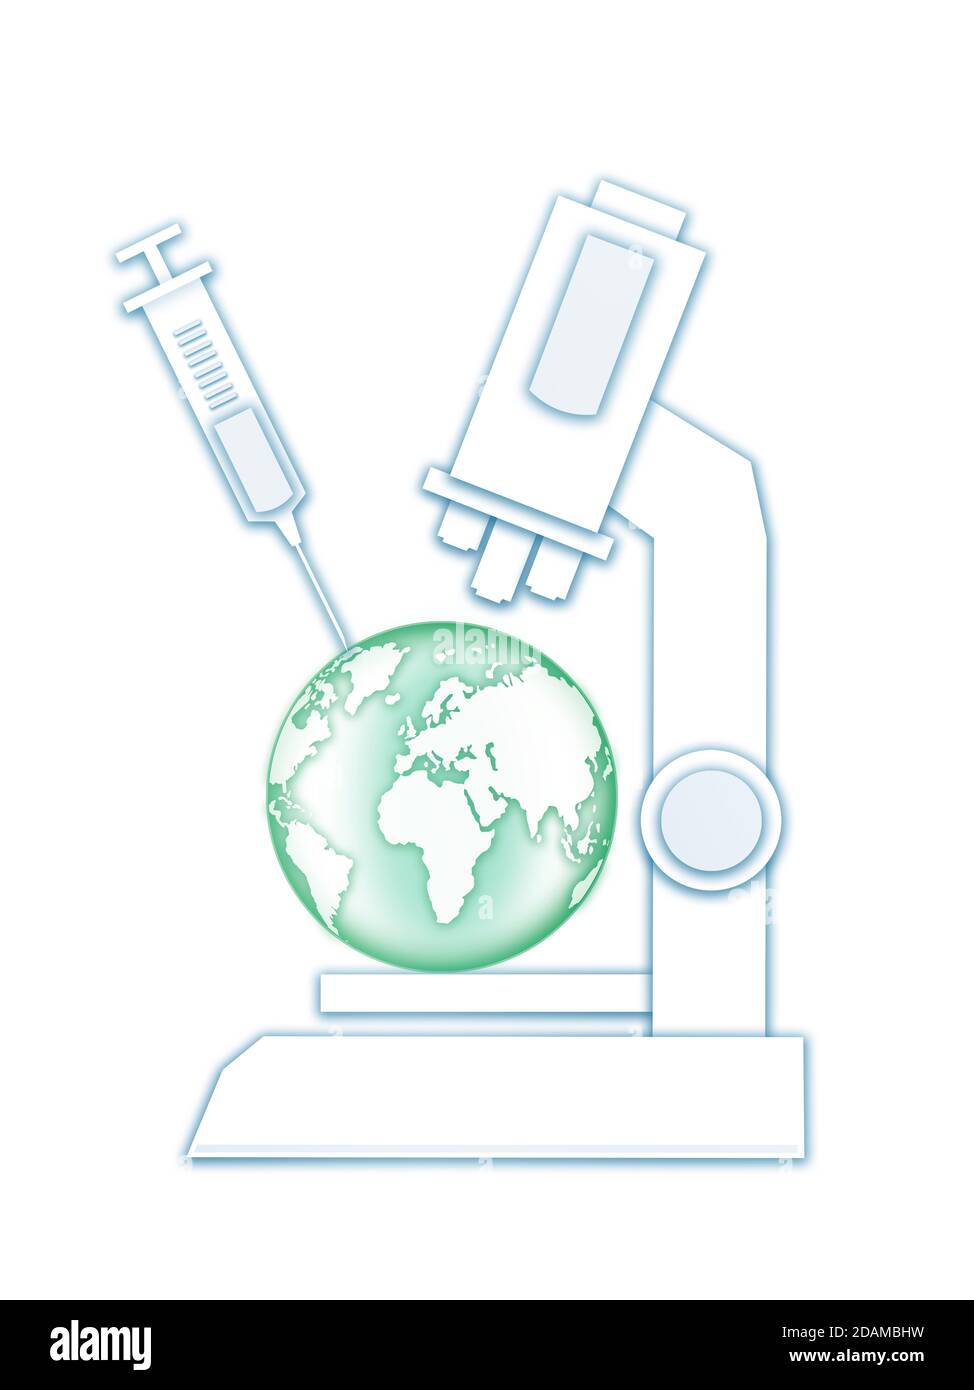 Earth being injected under a microscope, illustration. Stock Photo